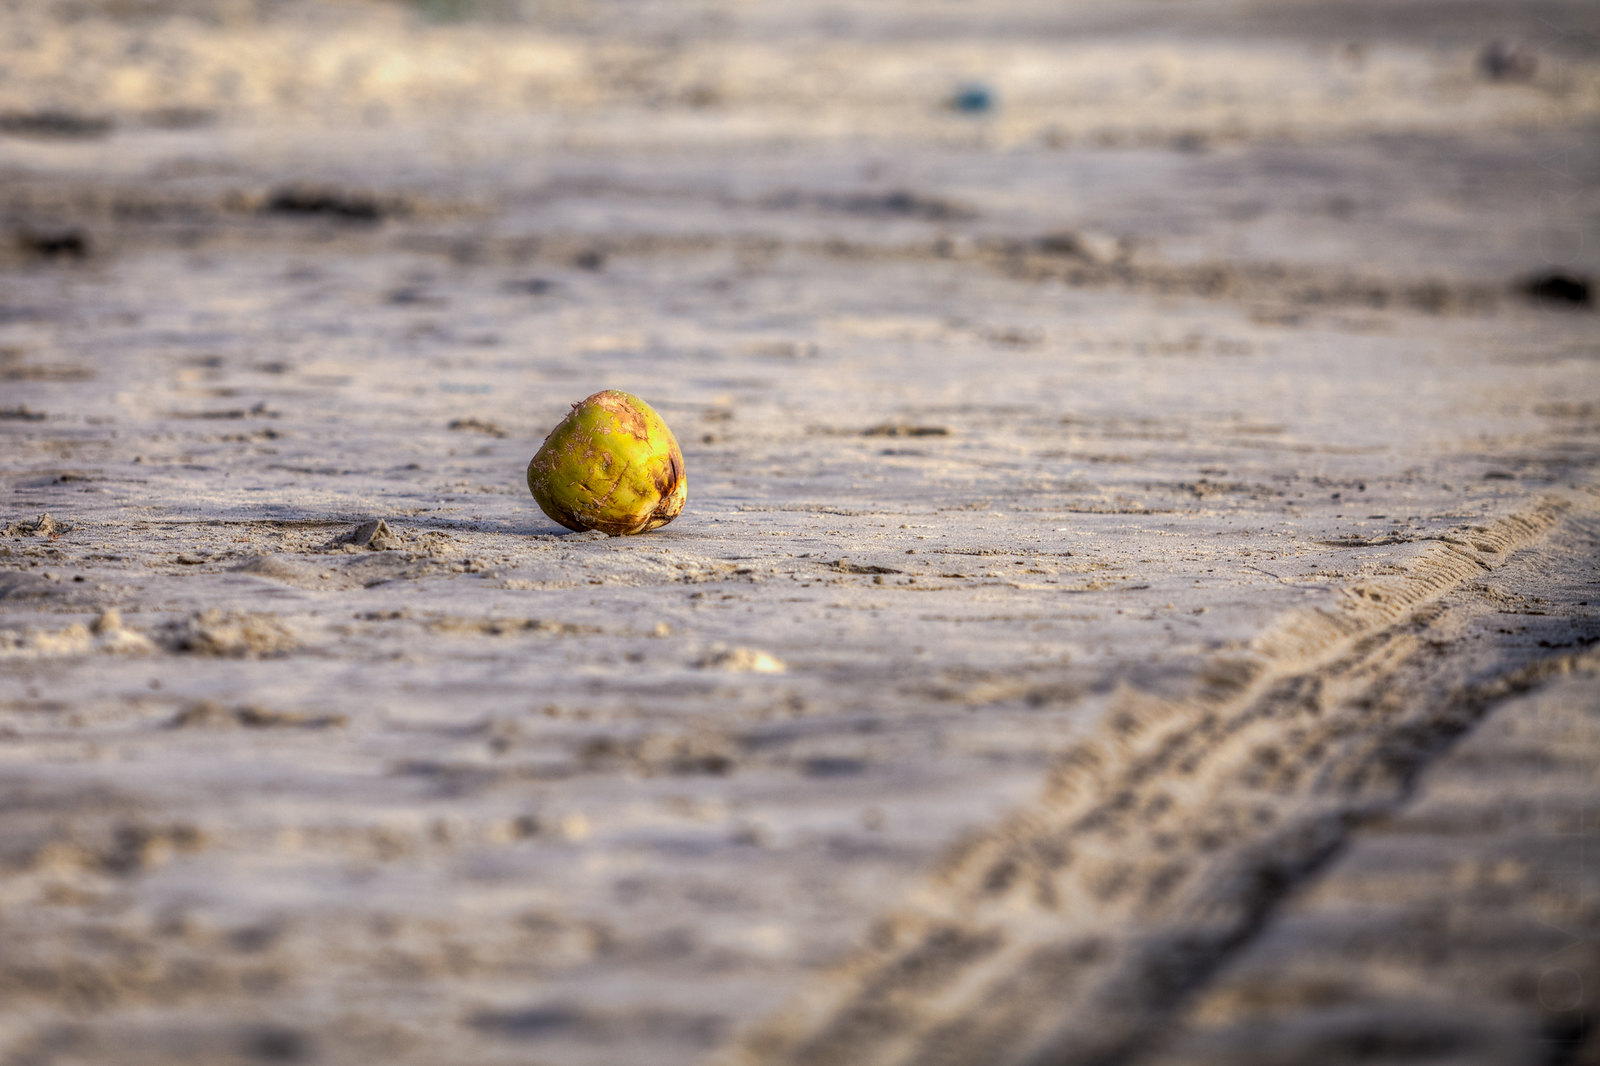 A coconut washed ashore